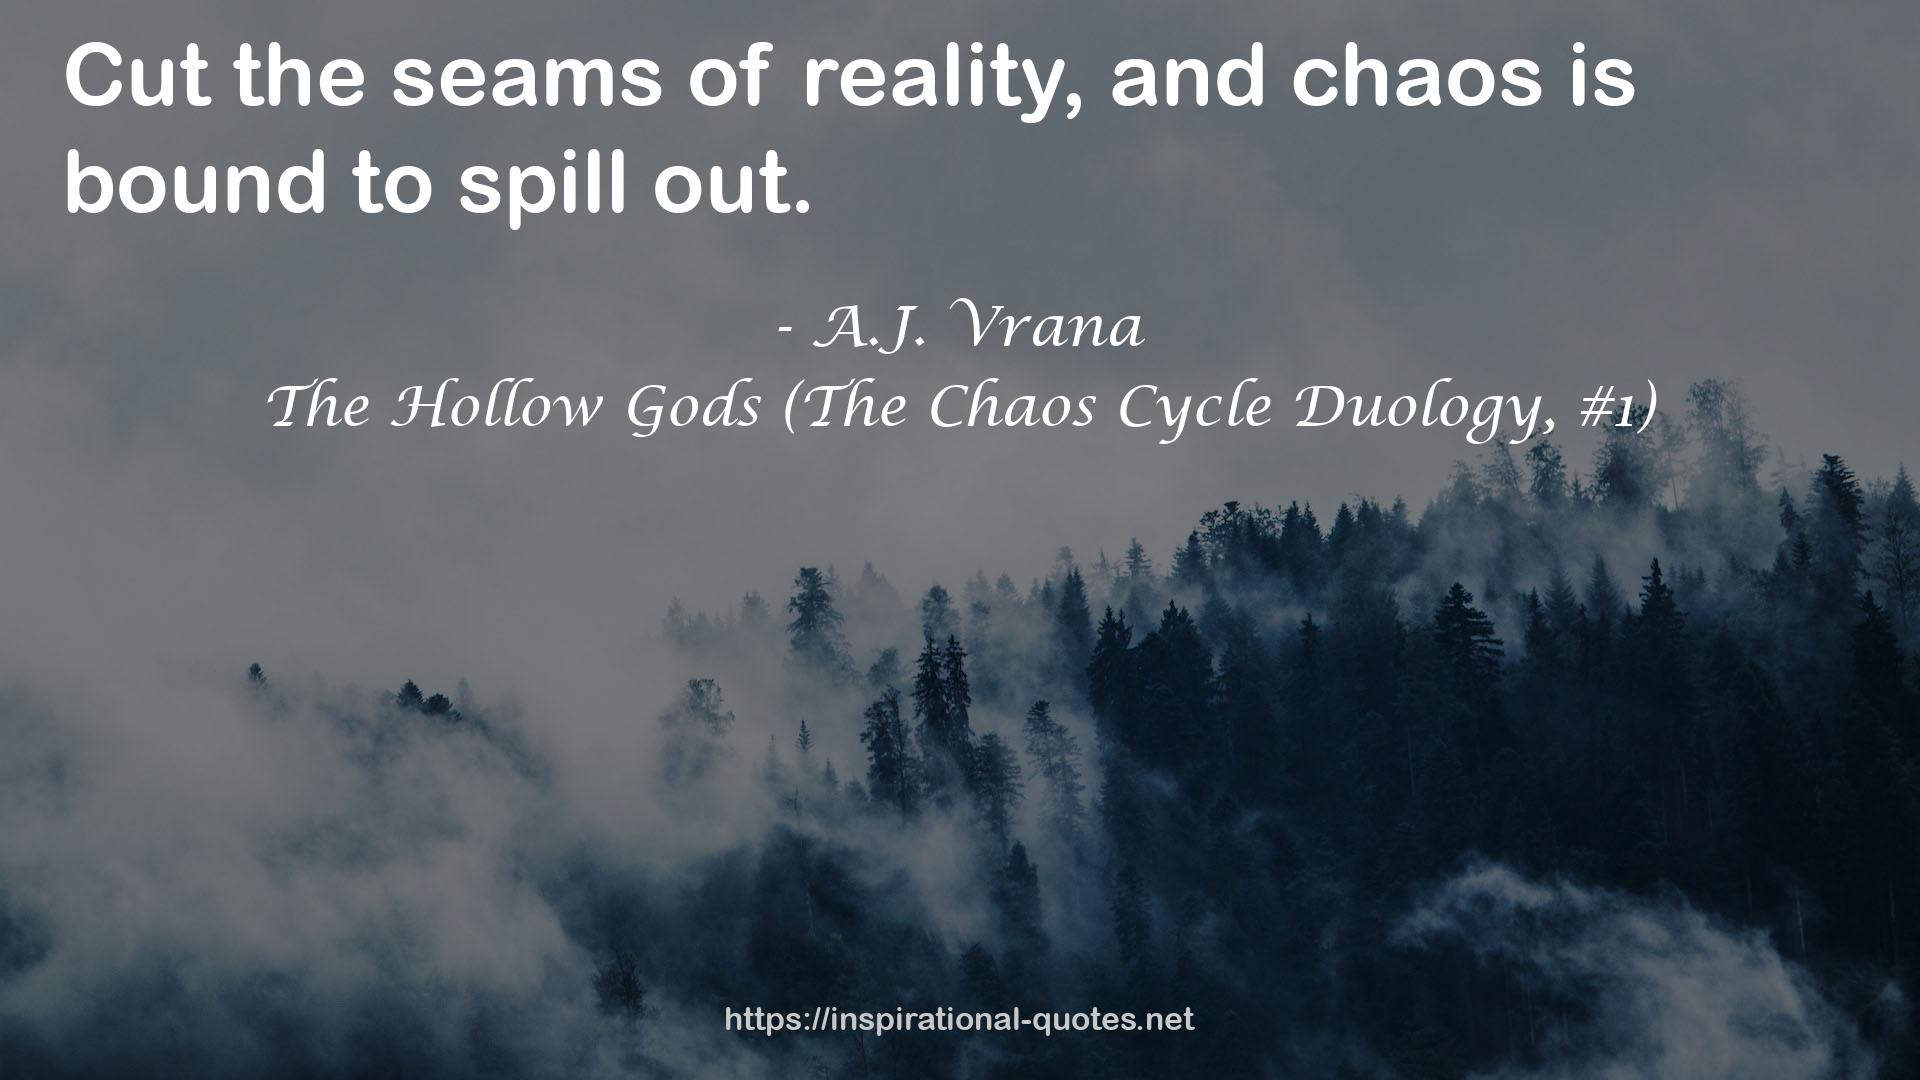 The Hollow Gods (The Chaos Cycle Duology, #1) QUOTES